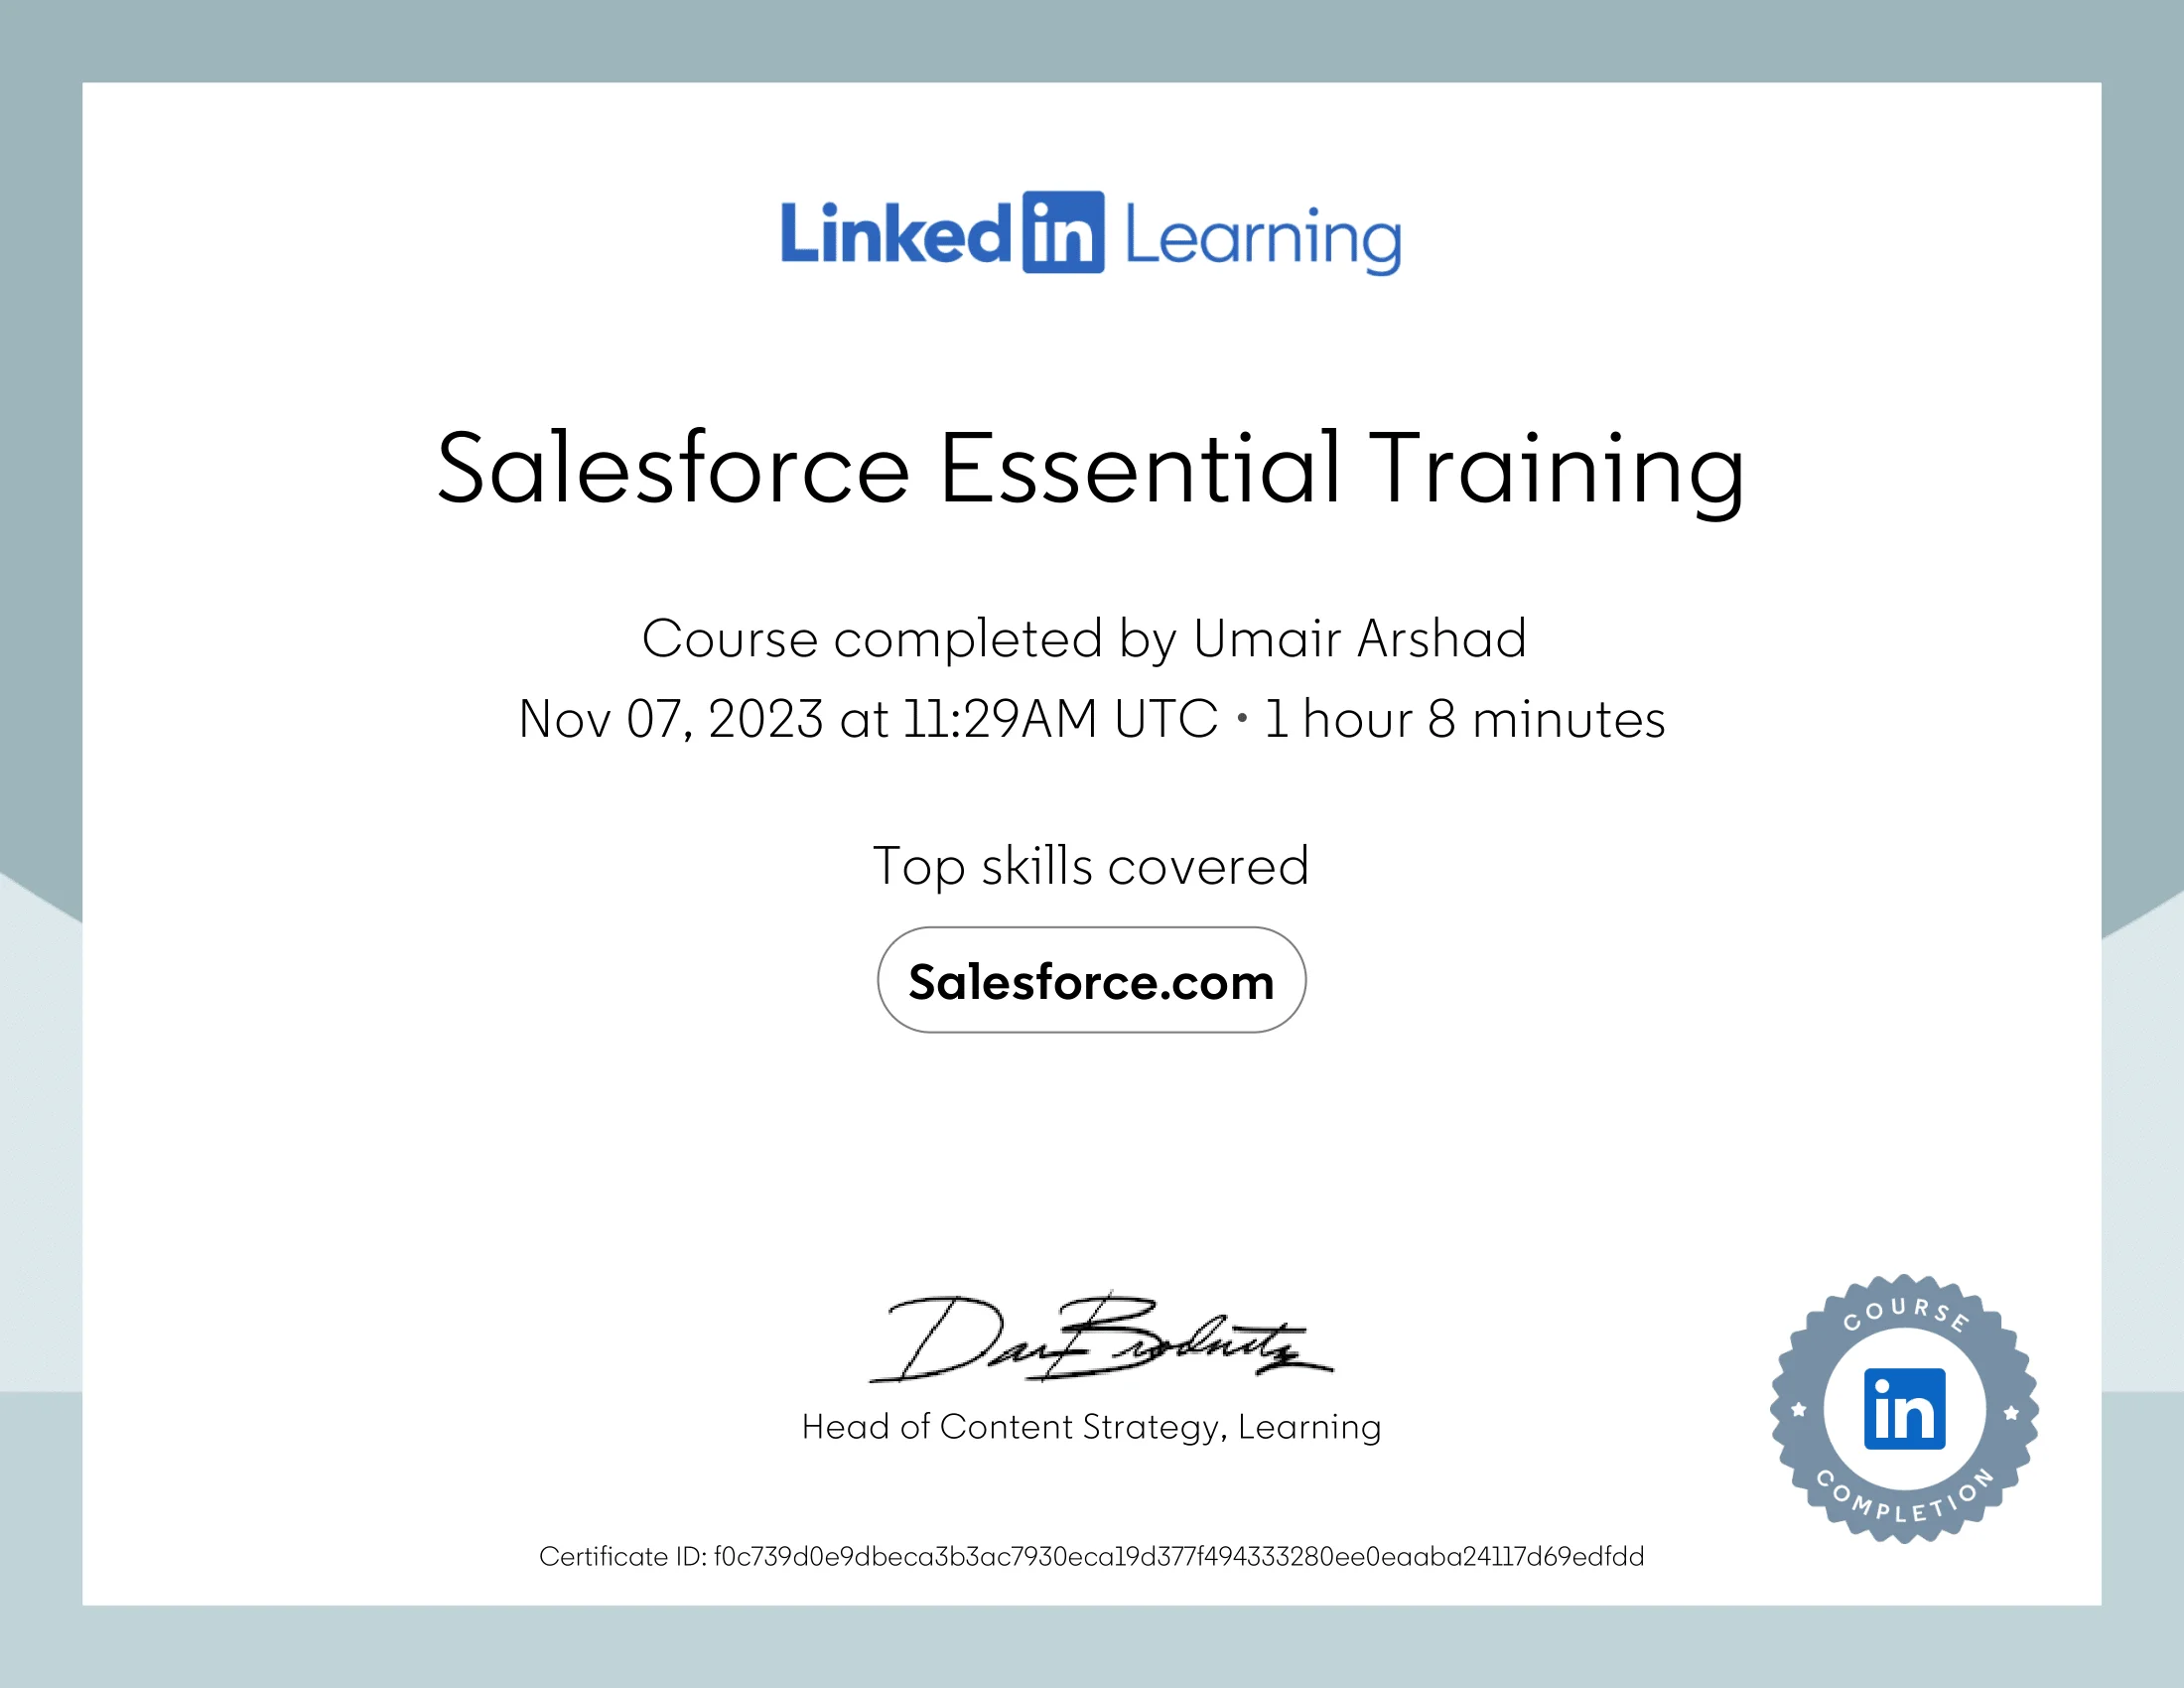 Certificate Of Completion_Sales force-Essential-Training-1